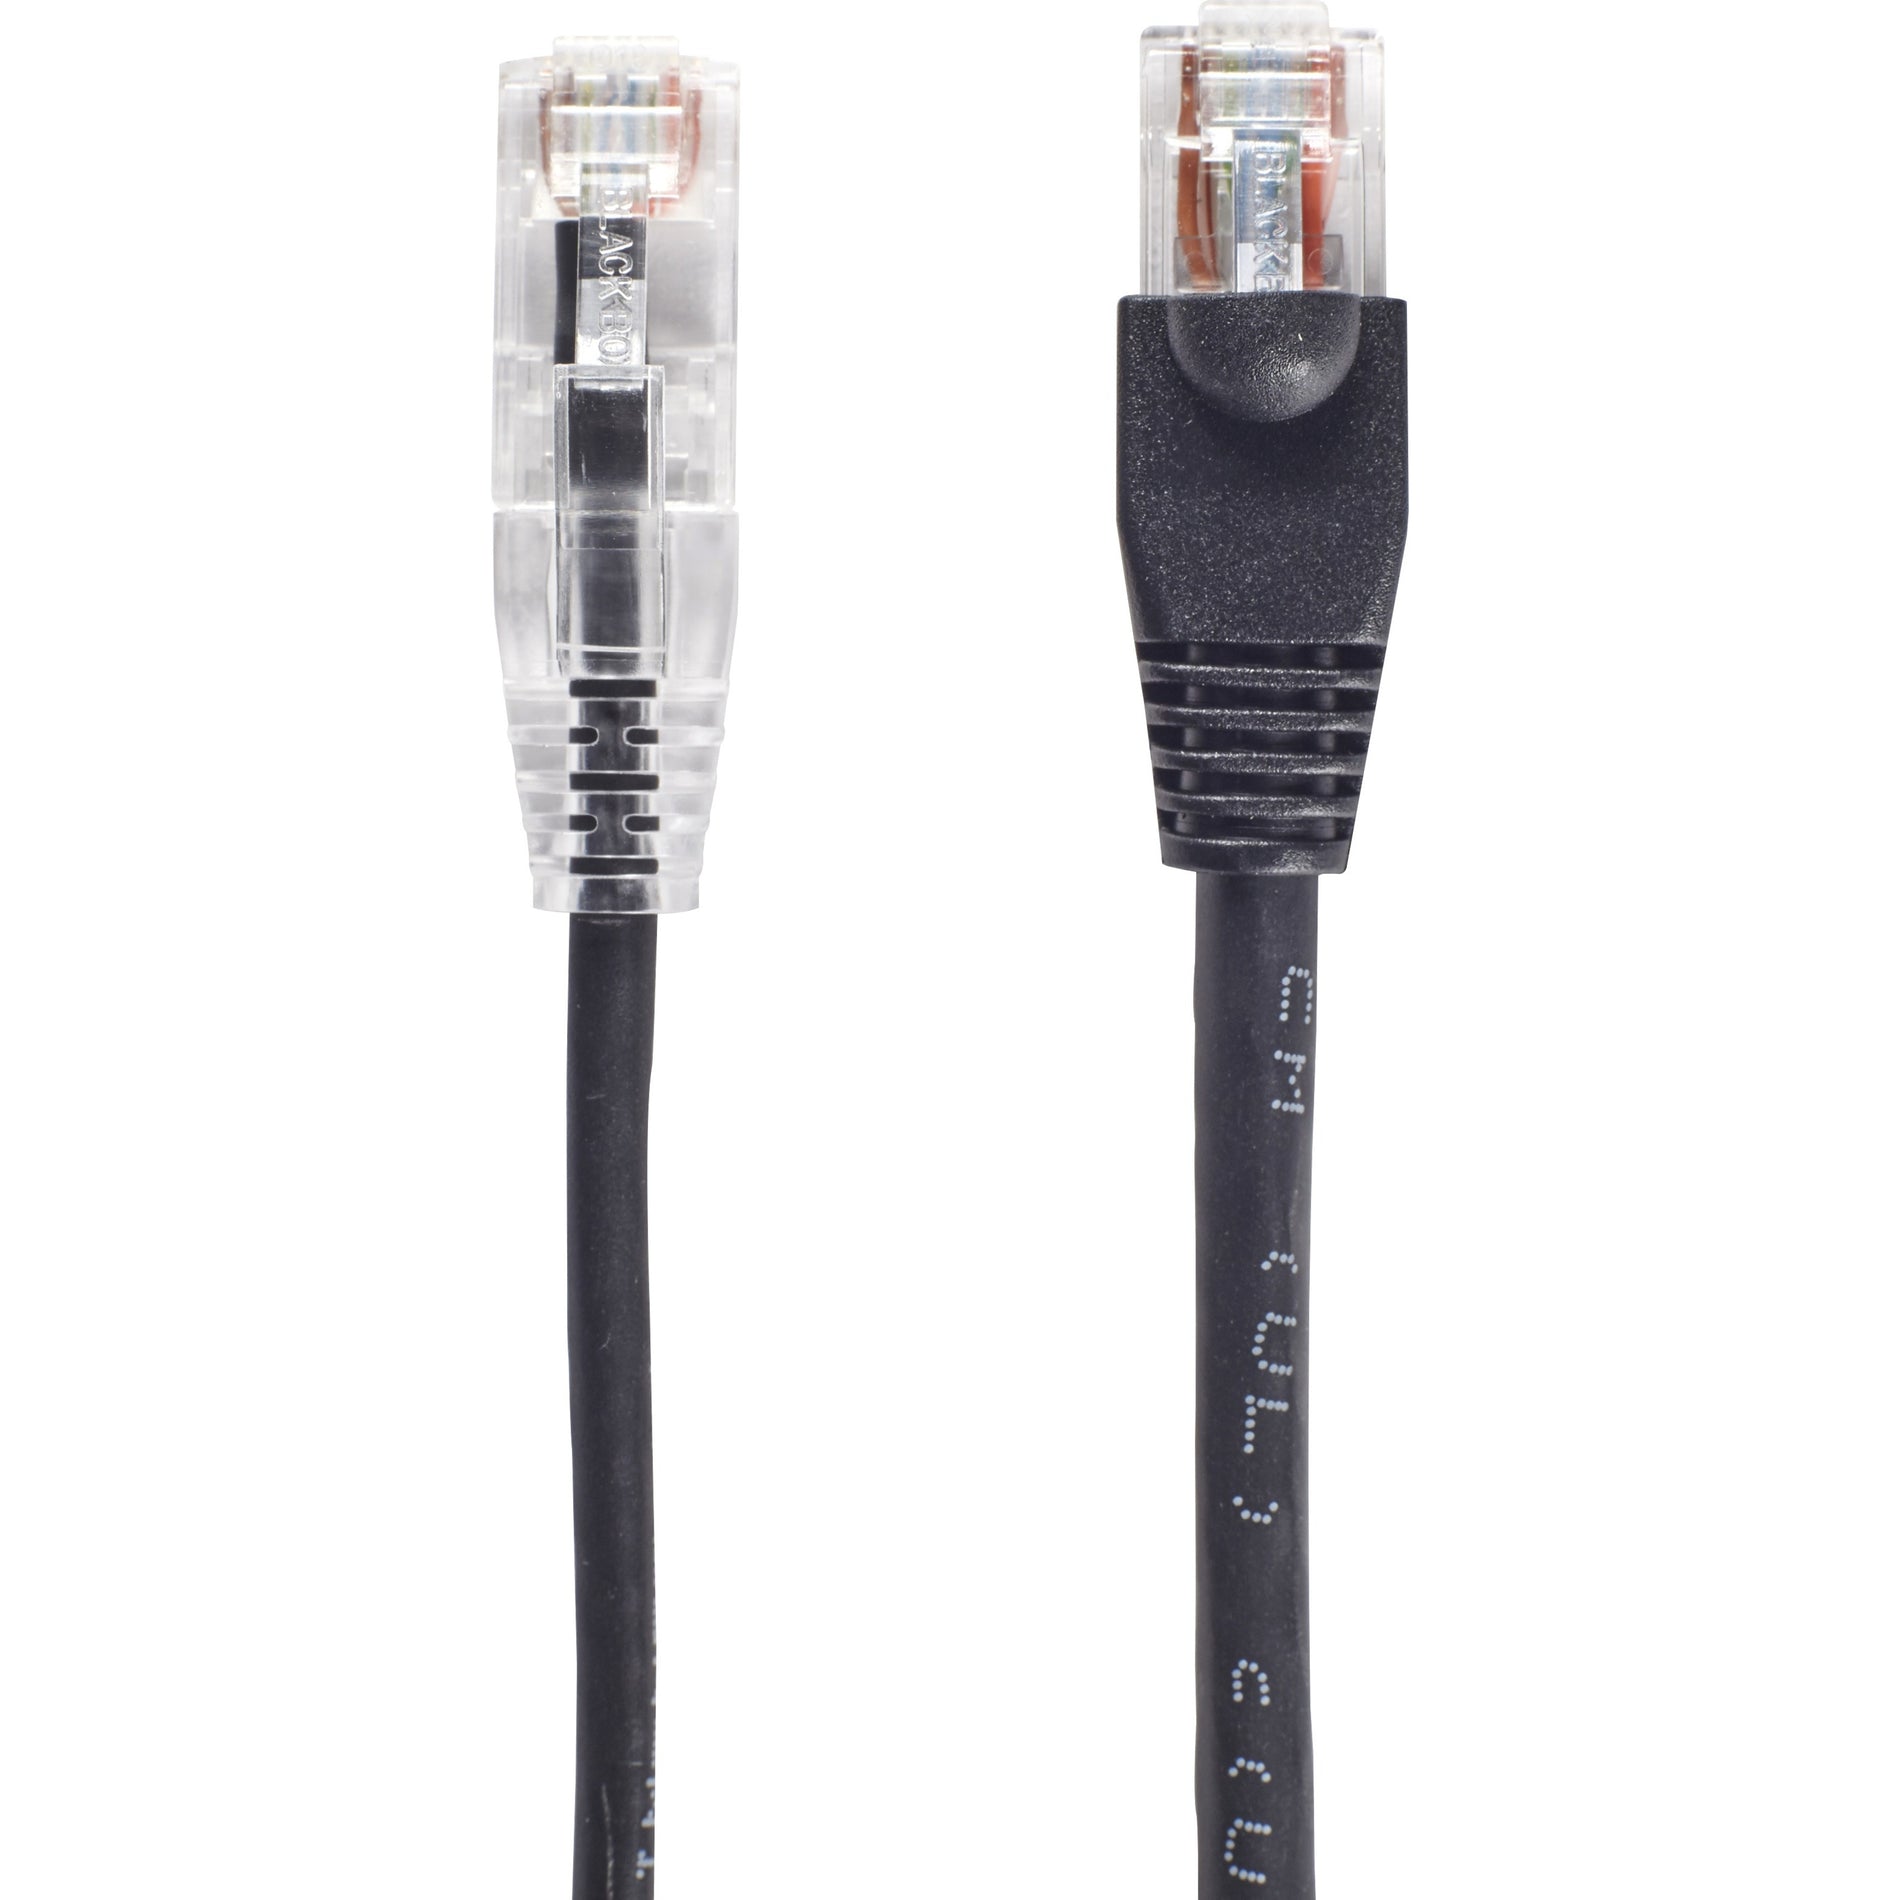 Black Box C6PC28-BK-07 Slim-Net Cat.6 UTP Patch Network Cable, 7 ft, Snagless Boot, 10 Gbit/s Data Transfer Rate